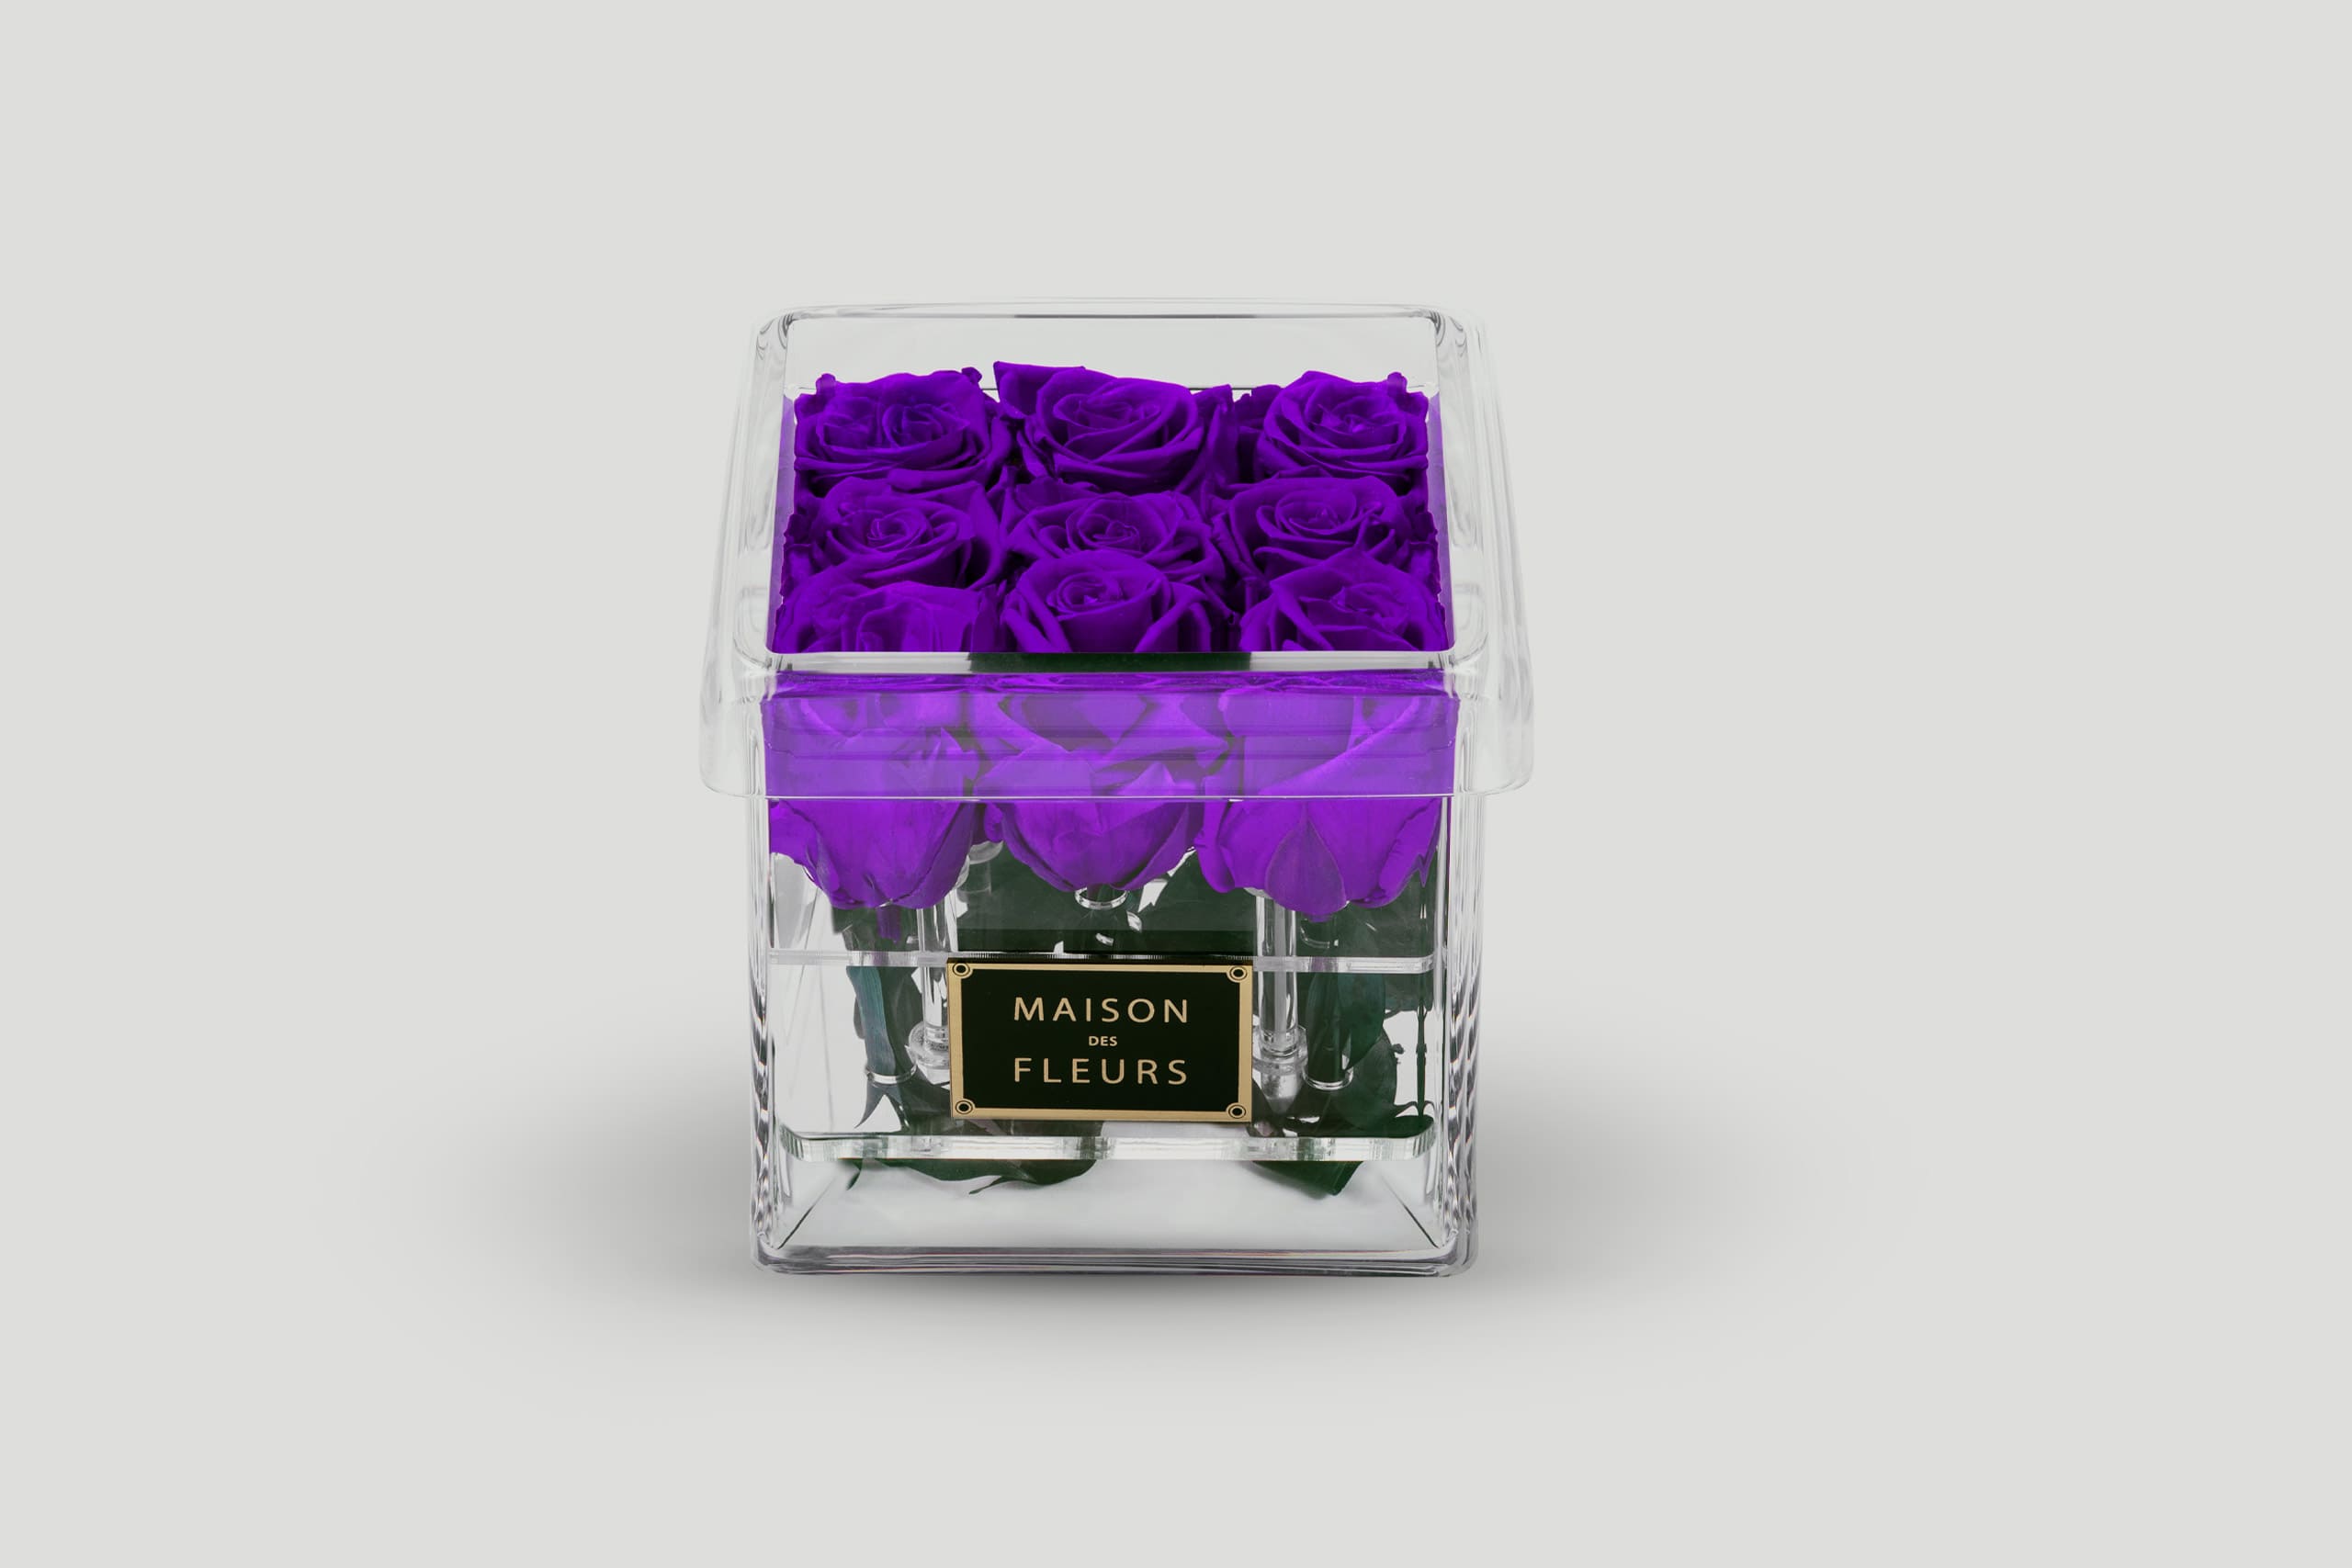 Purple Long life roses in a small acrylic box